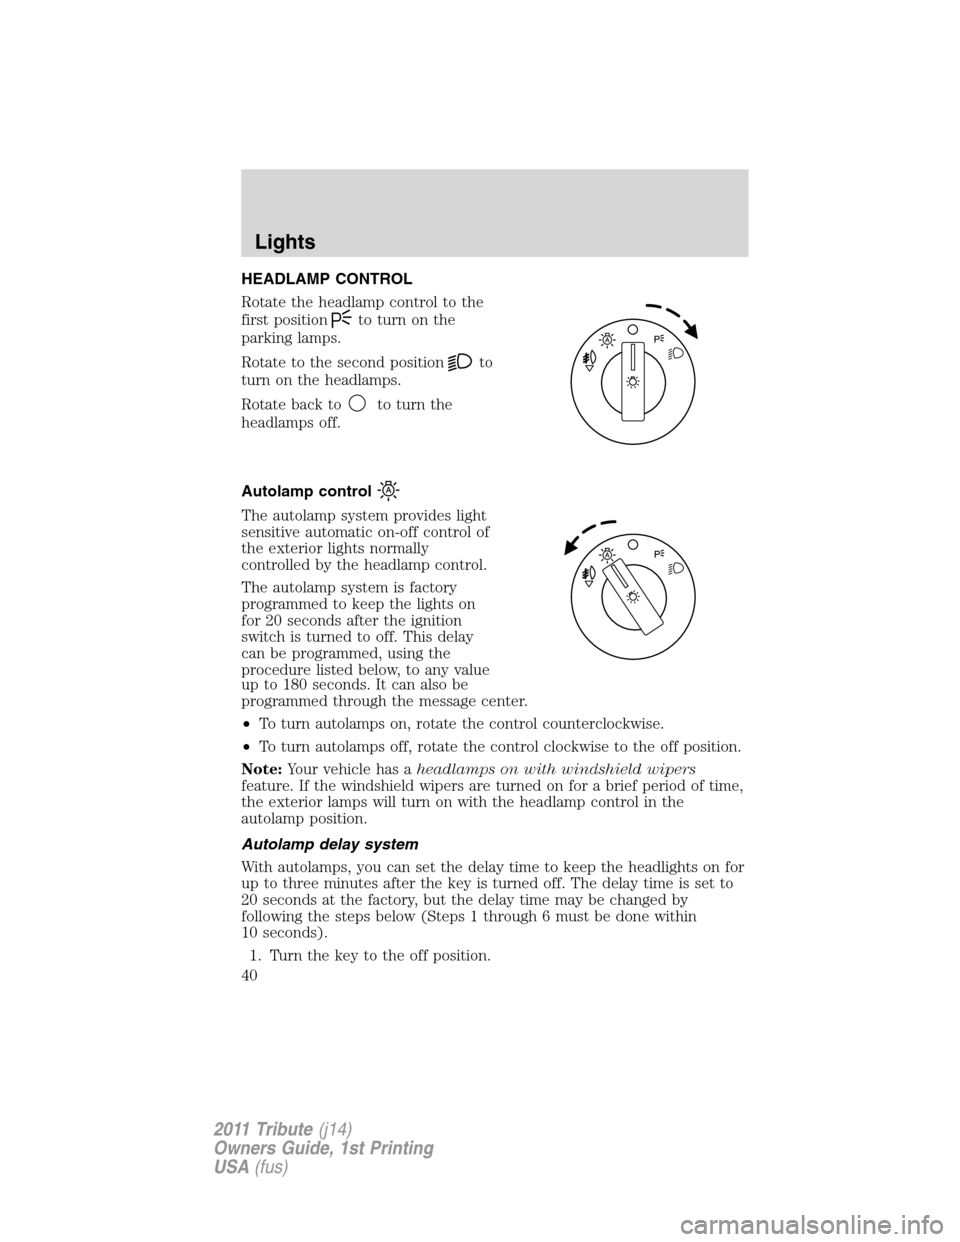 MAZDA MODEL TRIBUTE 2011  Owners Manual (in English) HEADLAMP CONTROL
Rotate the headlamp control to the
first position
to turn on the
parking lamps.
Rotate to the second position
to
turn on the headlamps.
Rotate back to
to turn the
headlamps off.
Autol